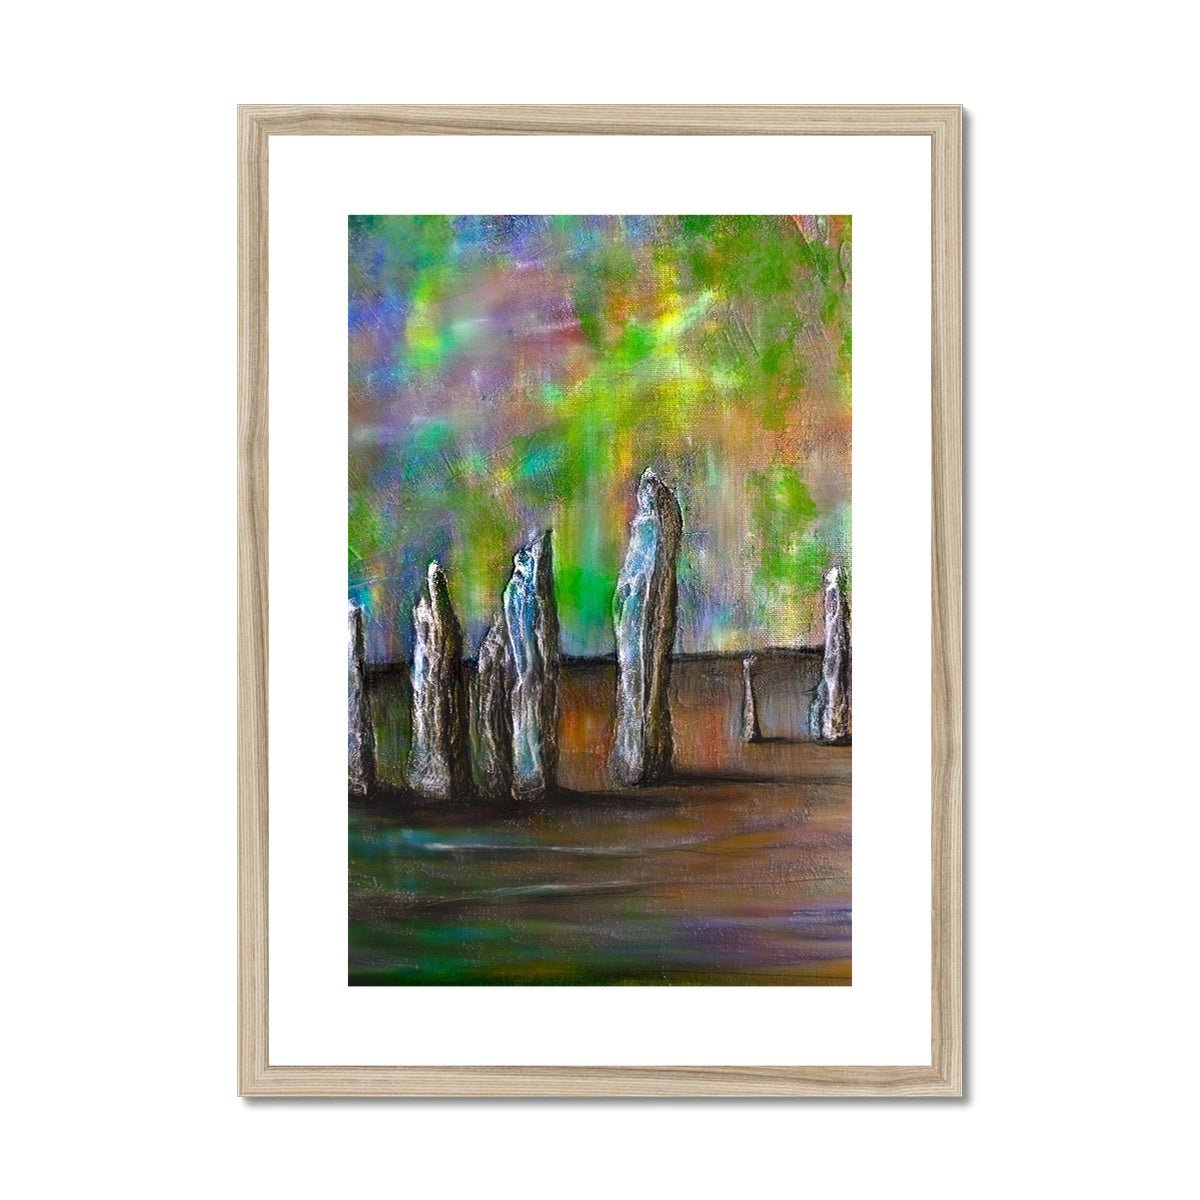 Callanish Northern Lights Lewis Painting | Framed & Mounted Prints From Scotland-Framed & Mounted Prints-Hebridean Islands Art Gallery-A2 Portrait-Natural Frame-Paintings, Prints, Homeware, Art Gifts From Scotland By Scottish Artist Kevin Hunter